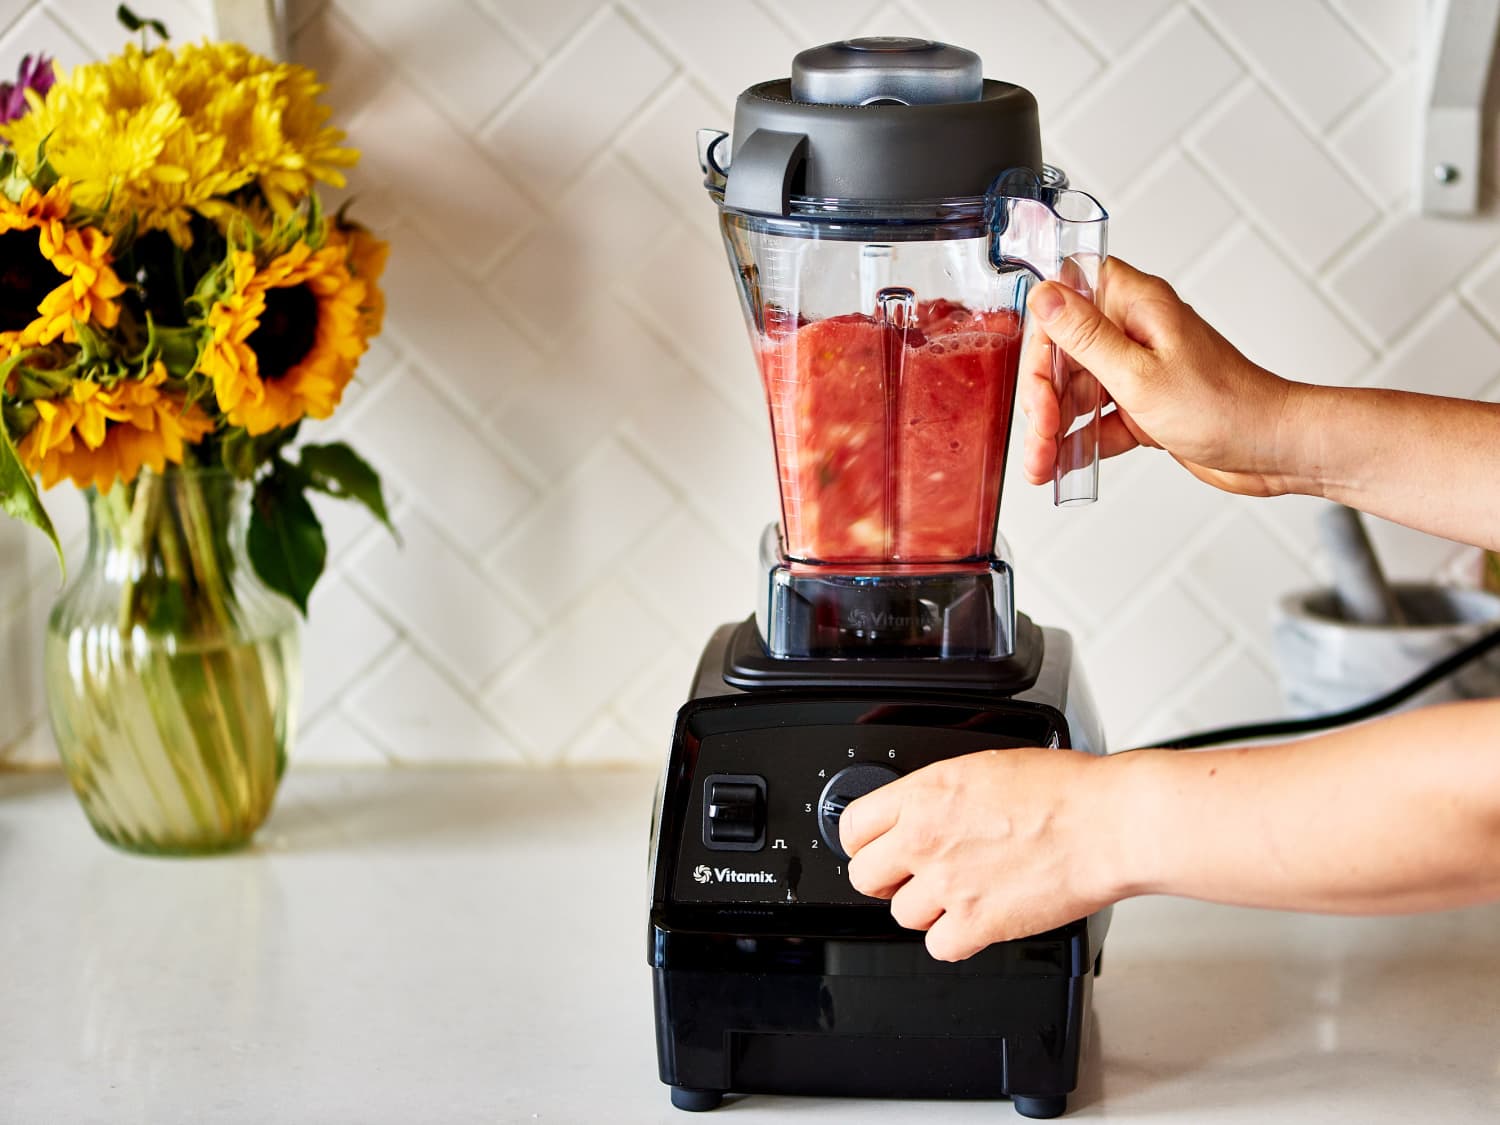 Save On Le Creuset, Vitamix For The Williams Sonoma Spring Sale